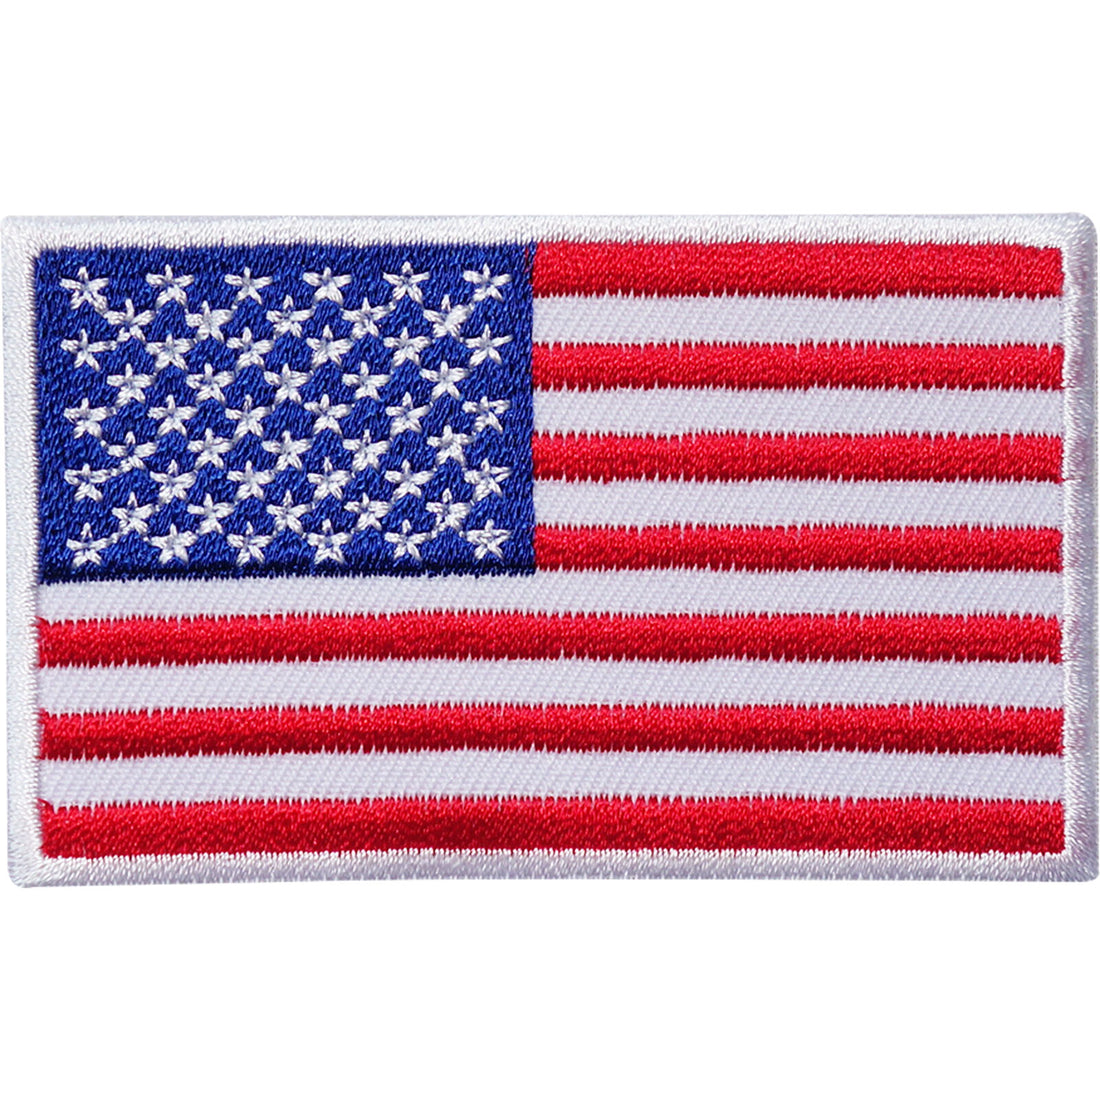 USA Flag Embroidered Iron / Sew On American Patch United States of America Badge